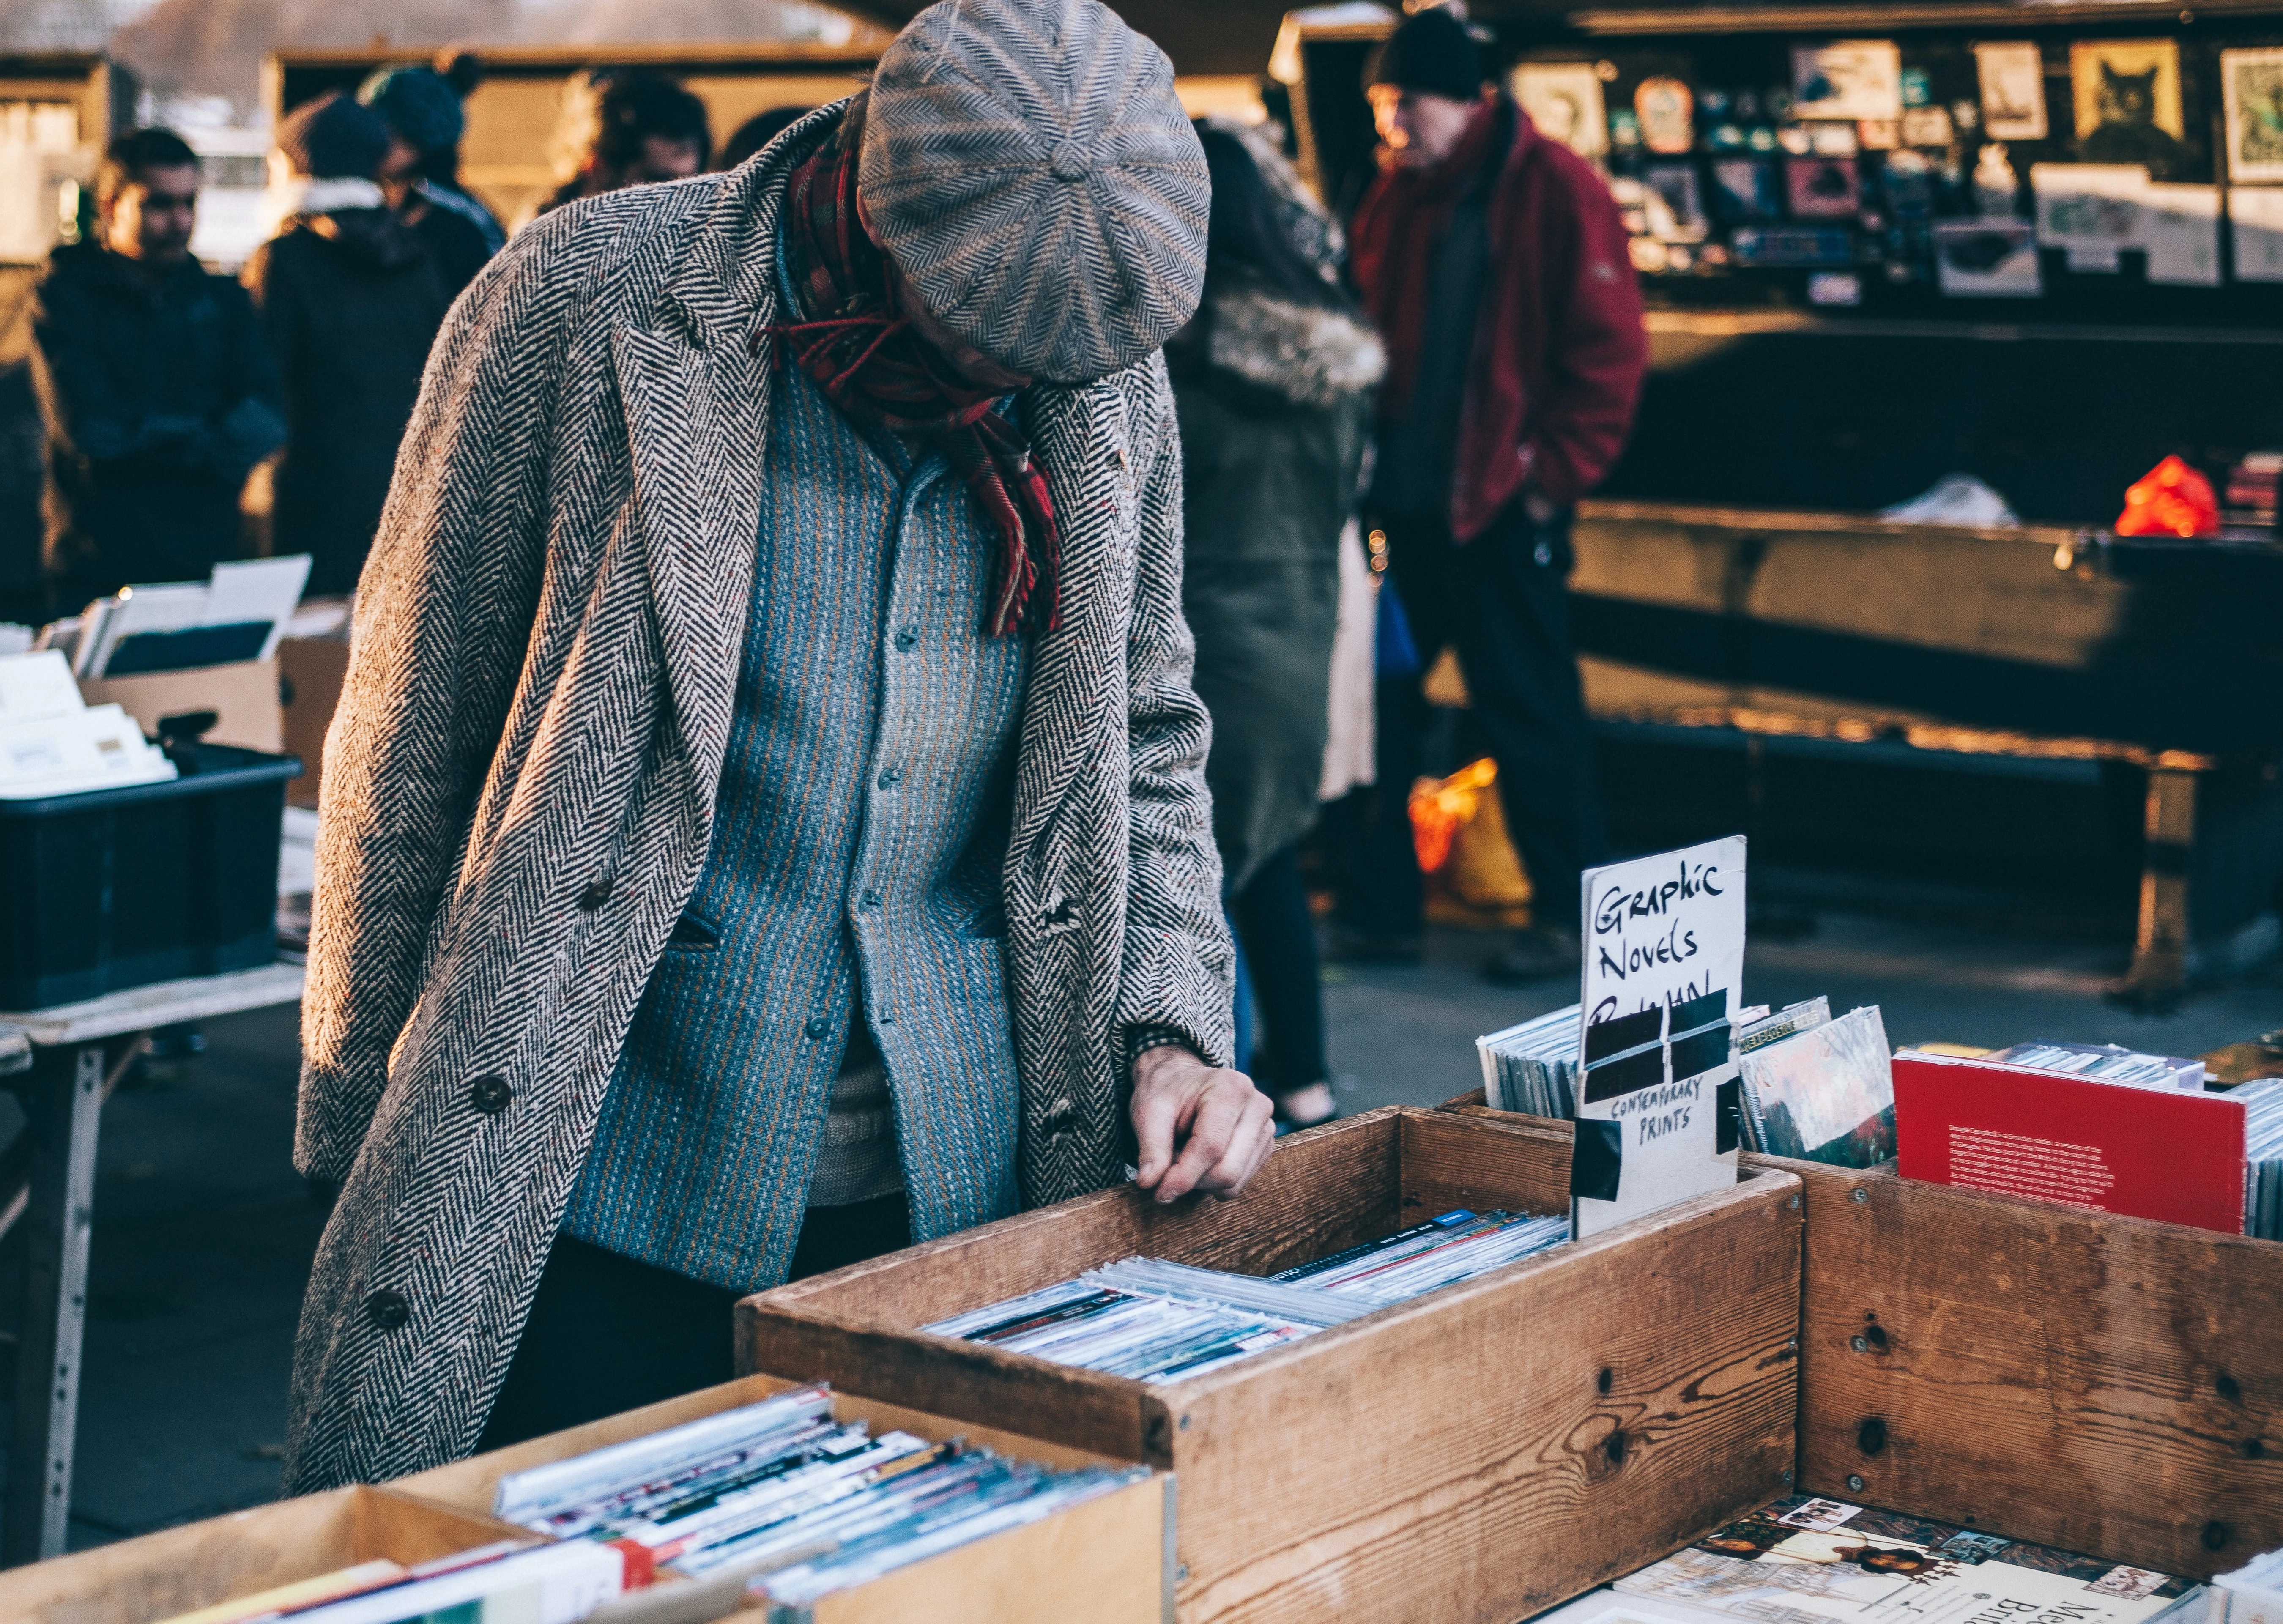 man at a flea market wearing a grey coat browsing books from wooden boxes